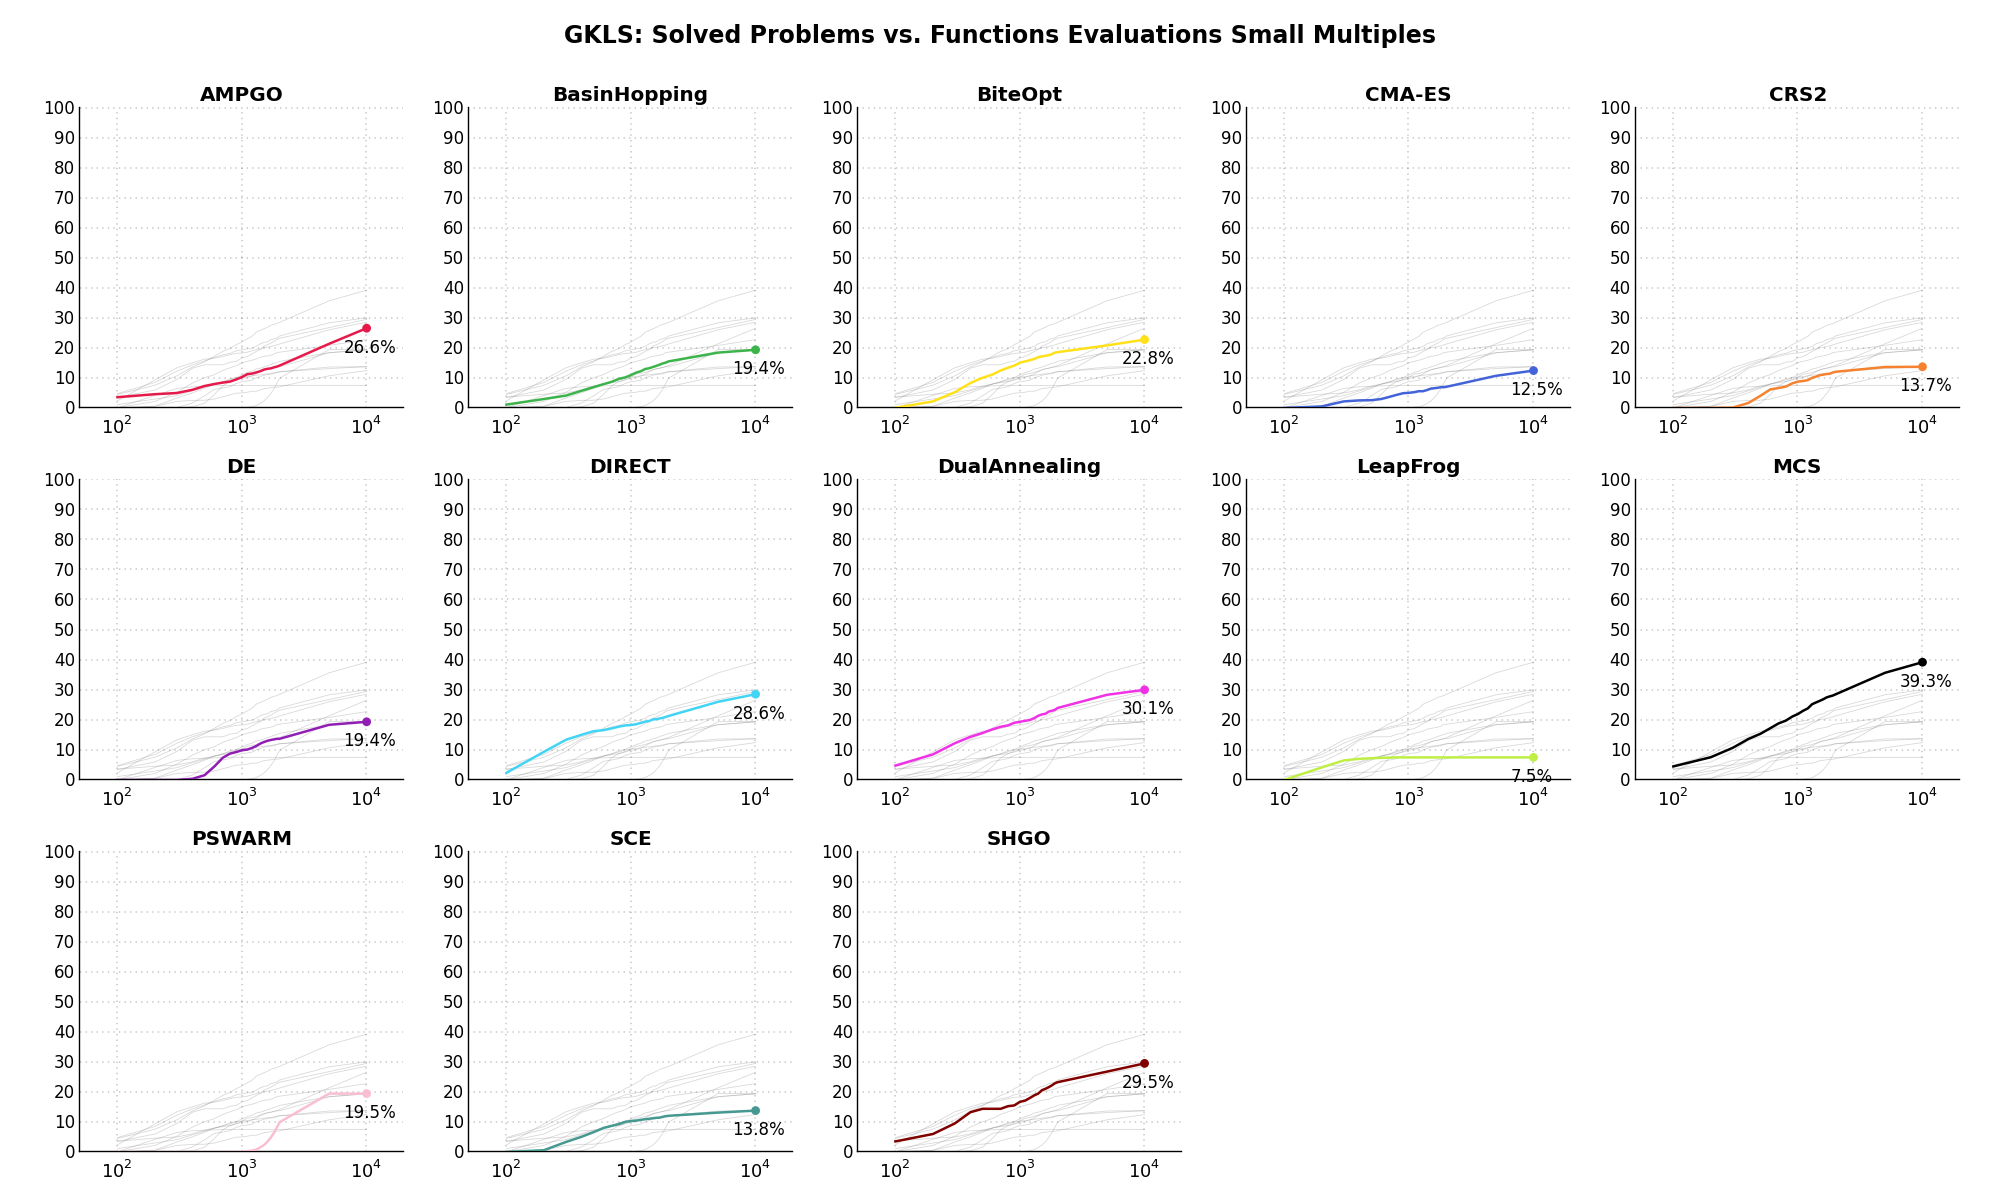 Percentage of problems solved given a fixed number of function evaluations on the GKLS test suite